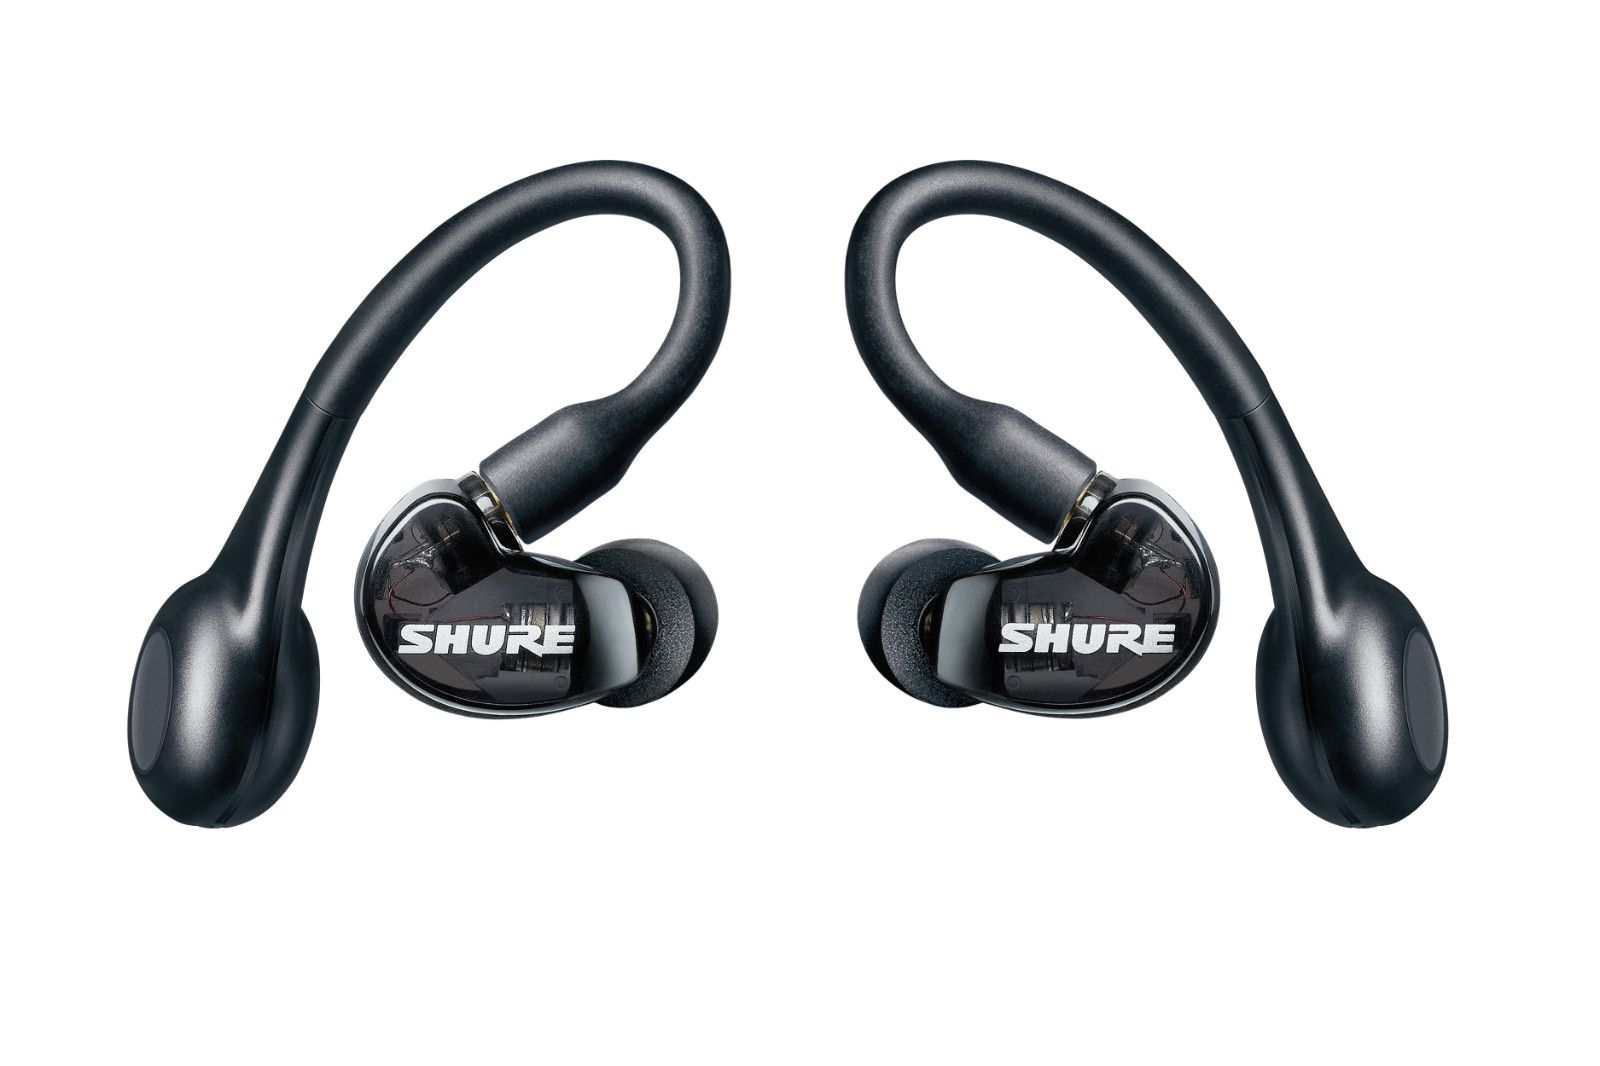 Shure Aonic 215 is companys first true wireless earphone pair image 1